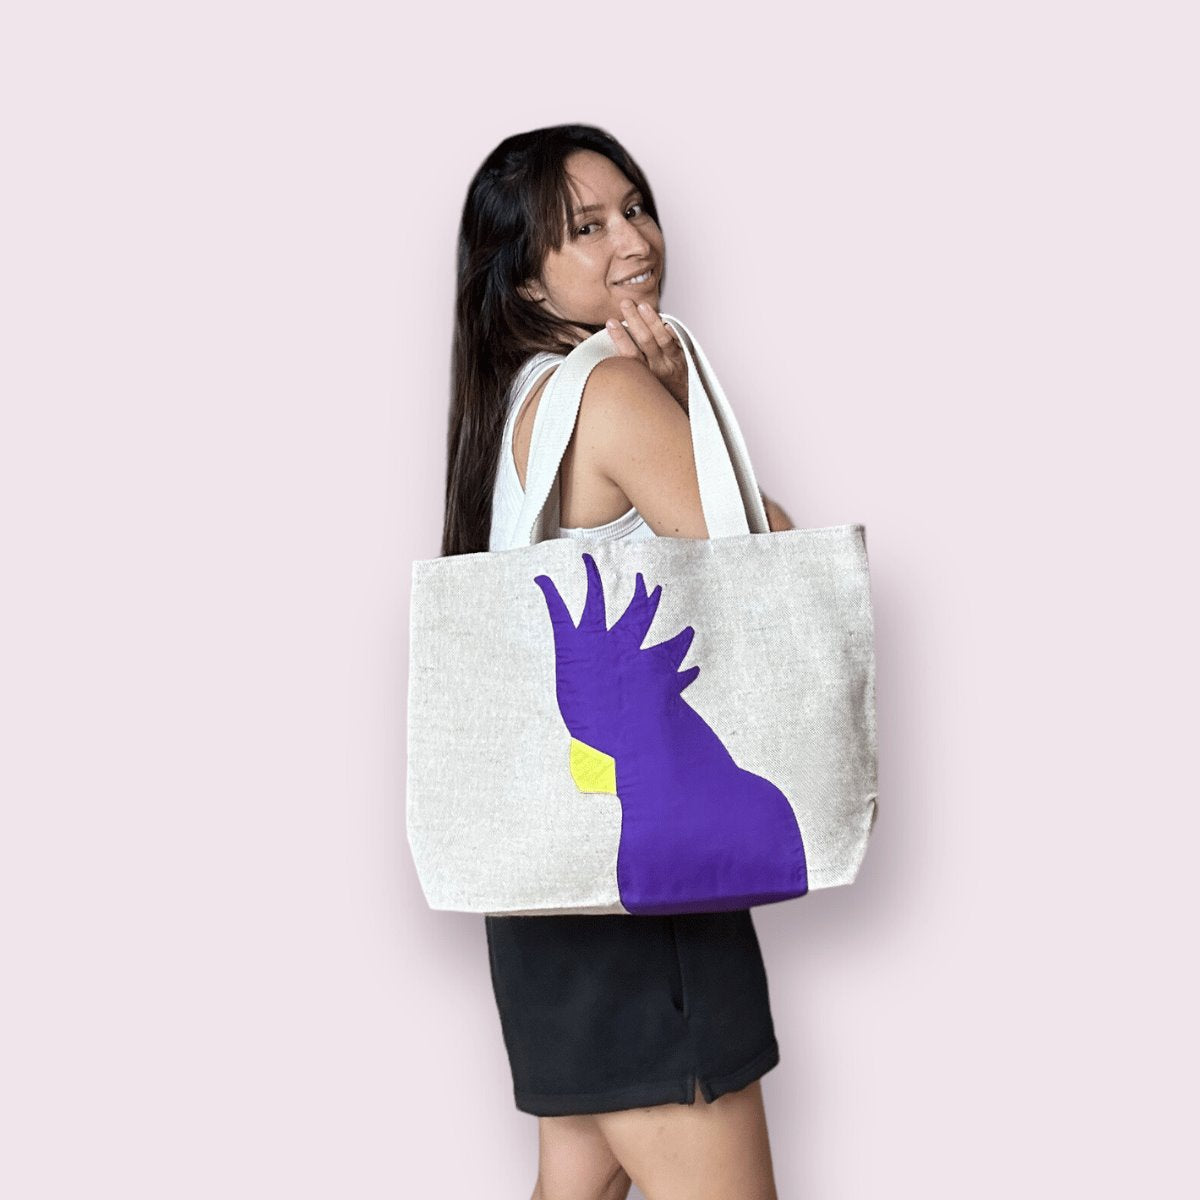 Cockatoo Jute Tote in Purple and Yellow Bags and purses WEFTshop 